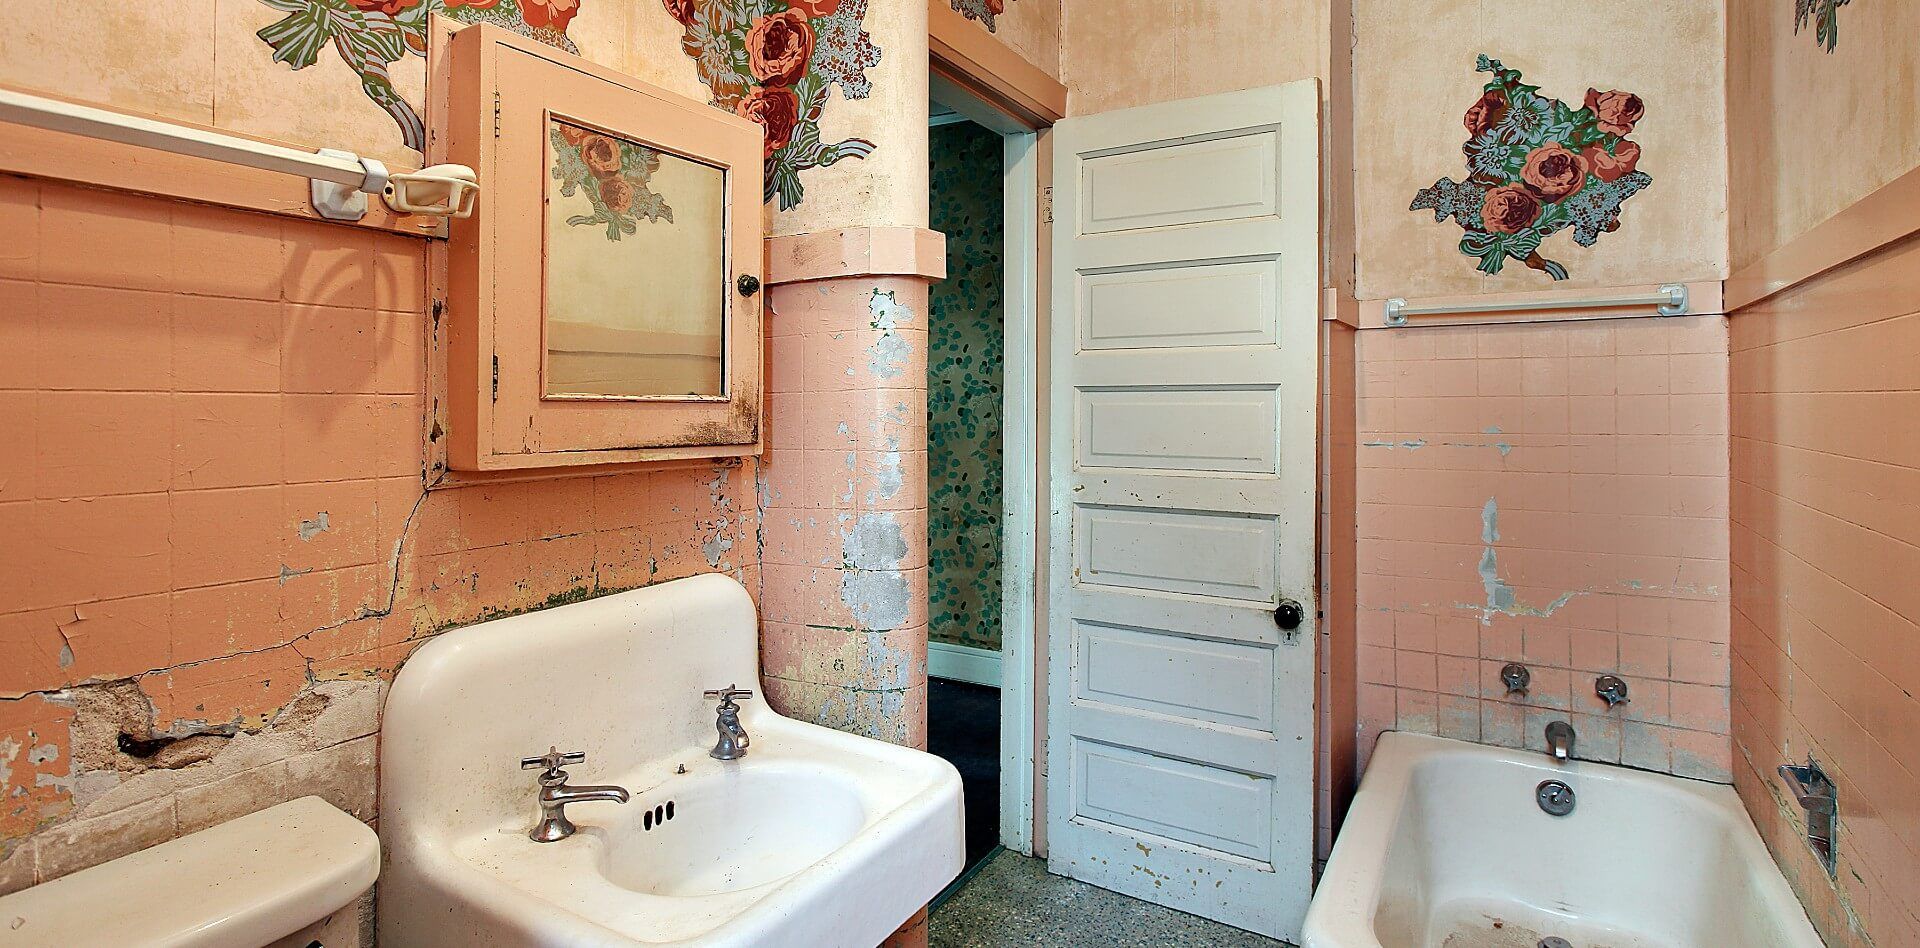 Peeling paint and old style are just some of the signs its time to remodel your bathroom